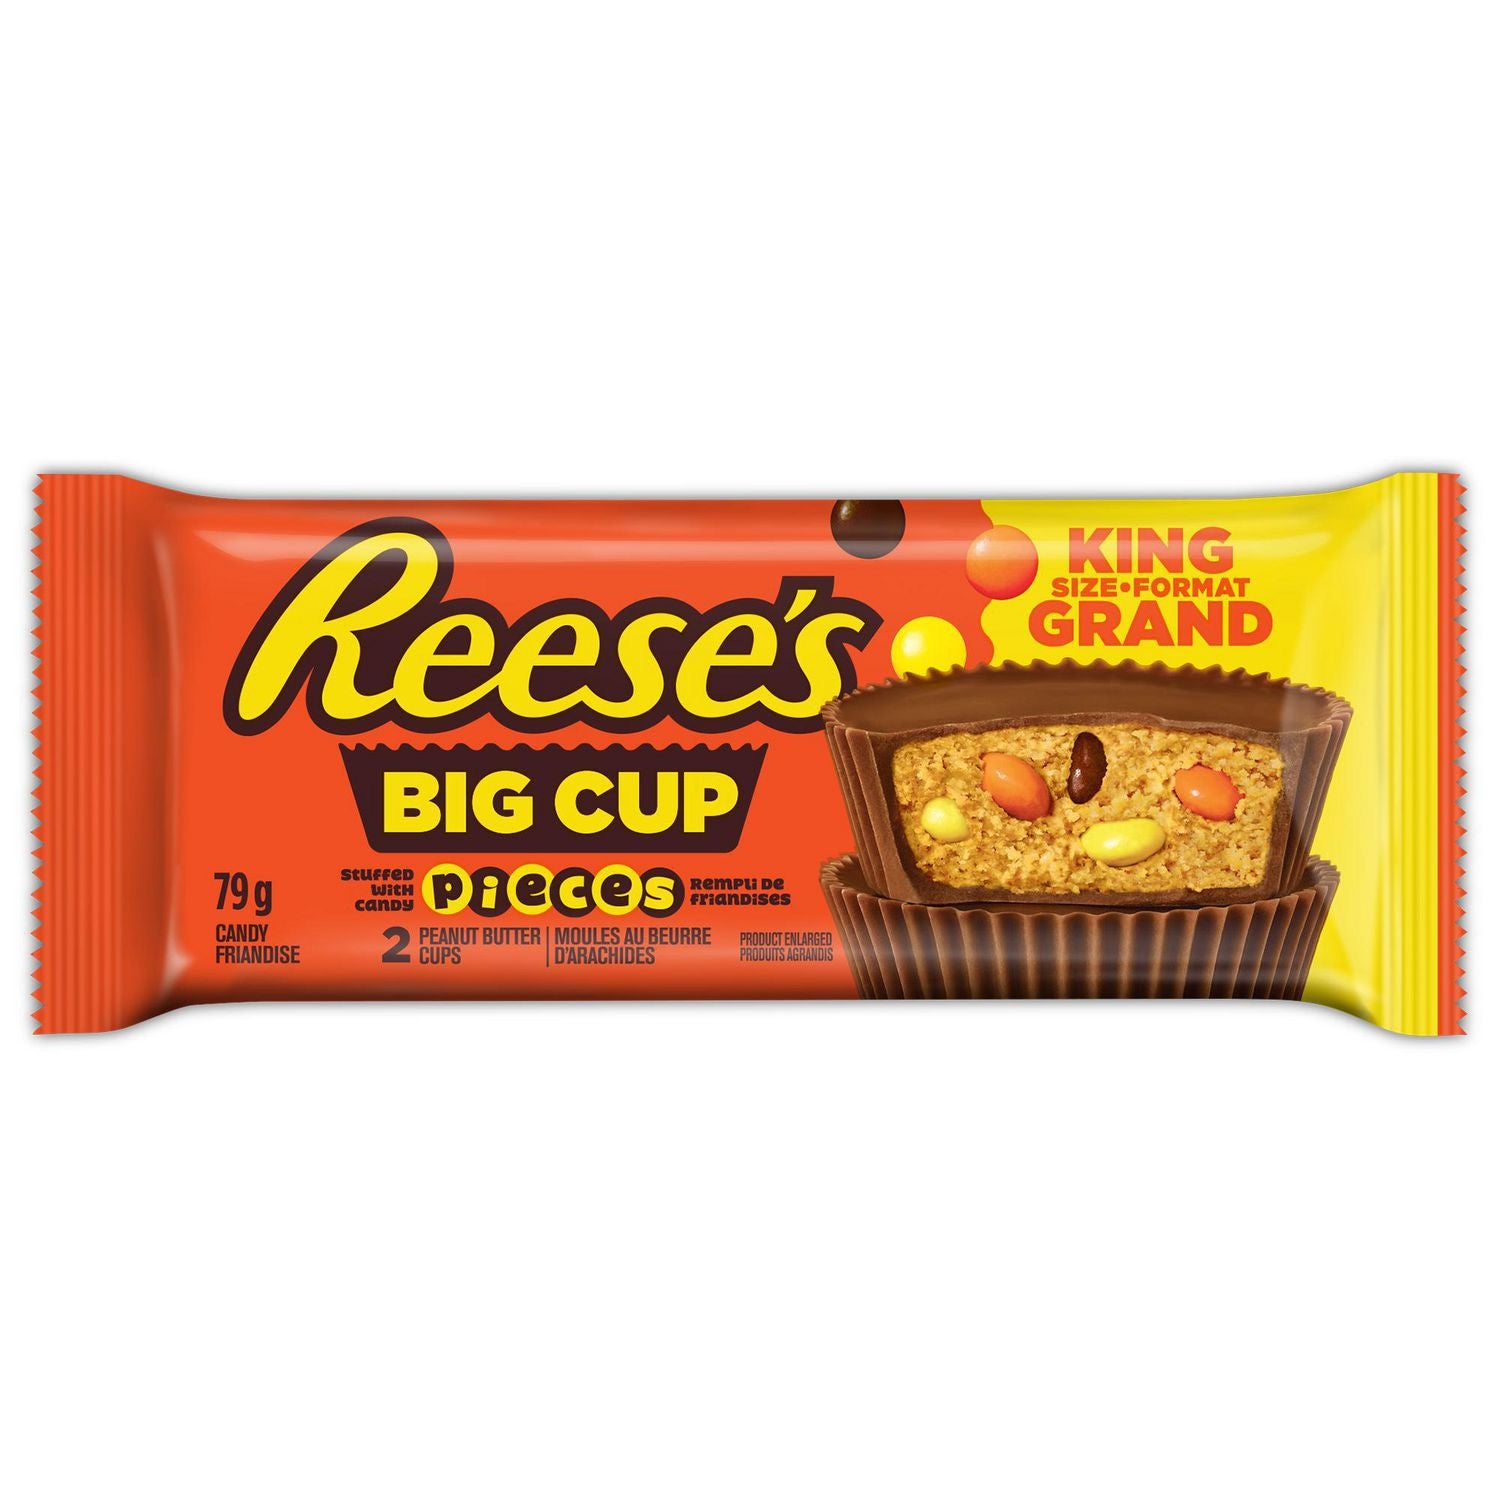 Reese Big Cup King Size With Pieces